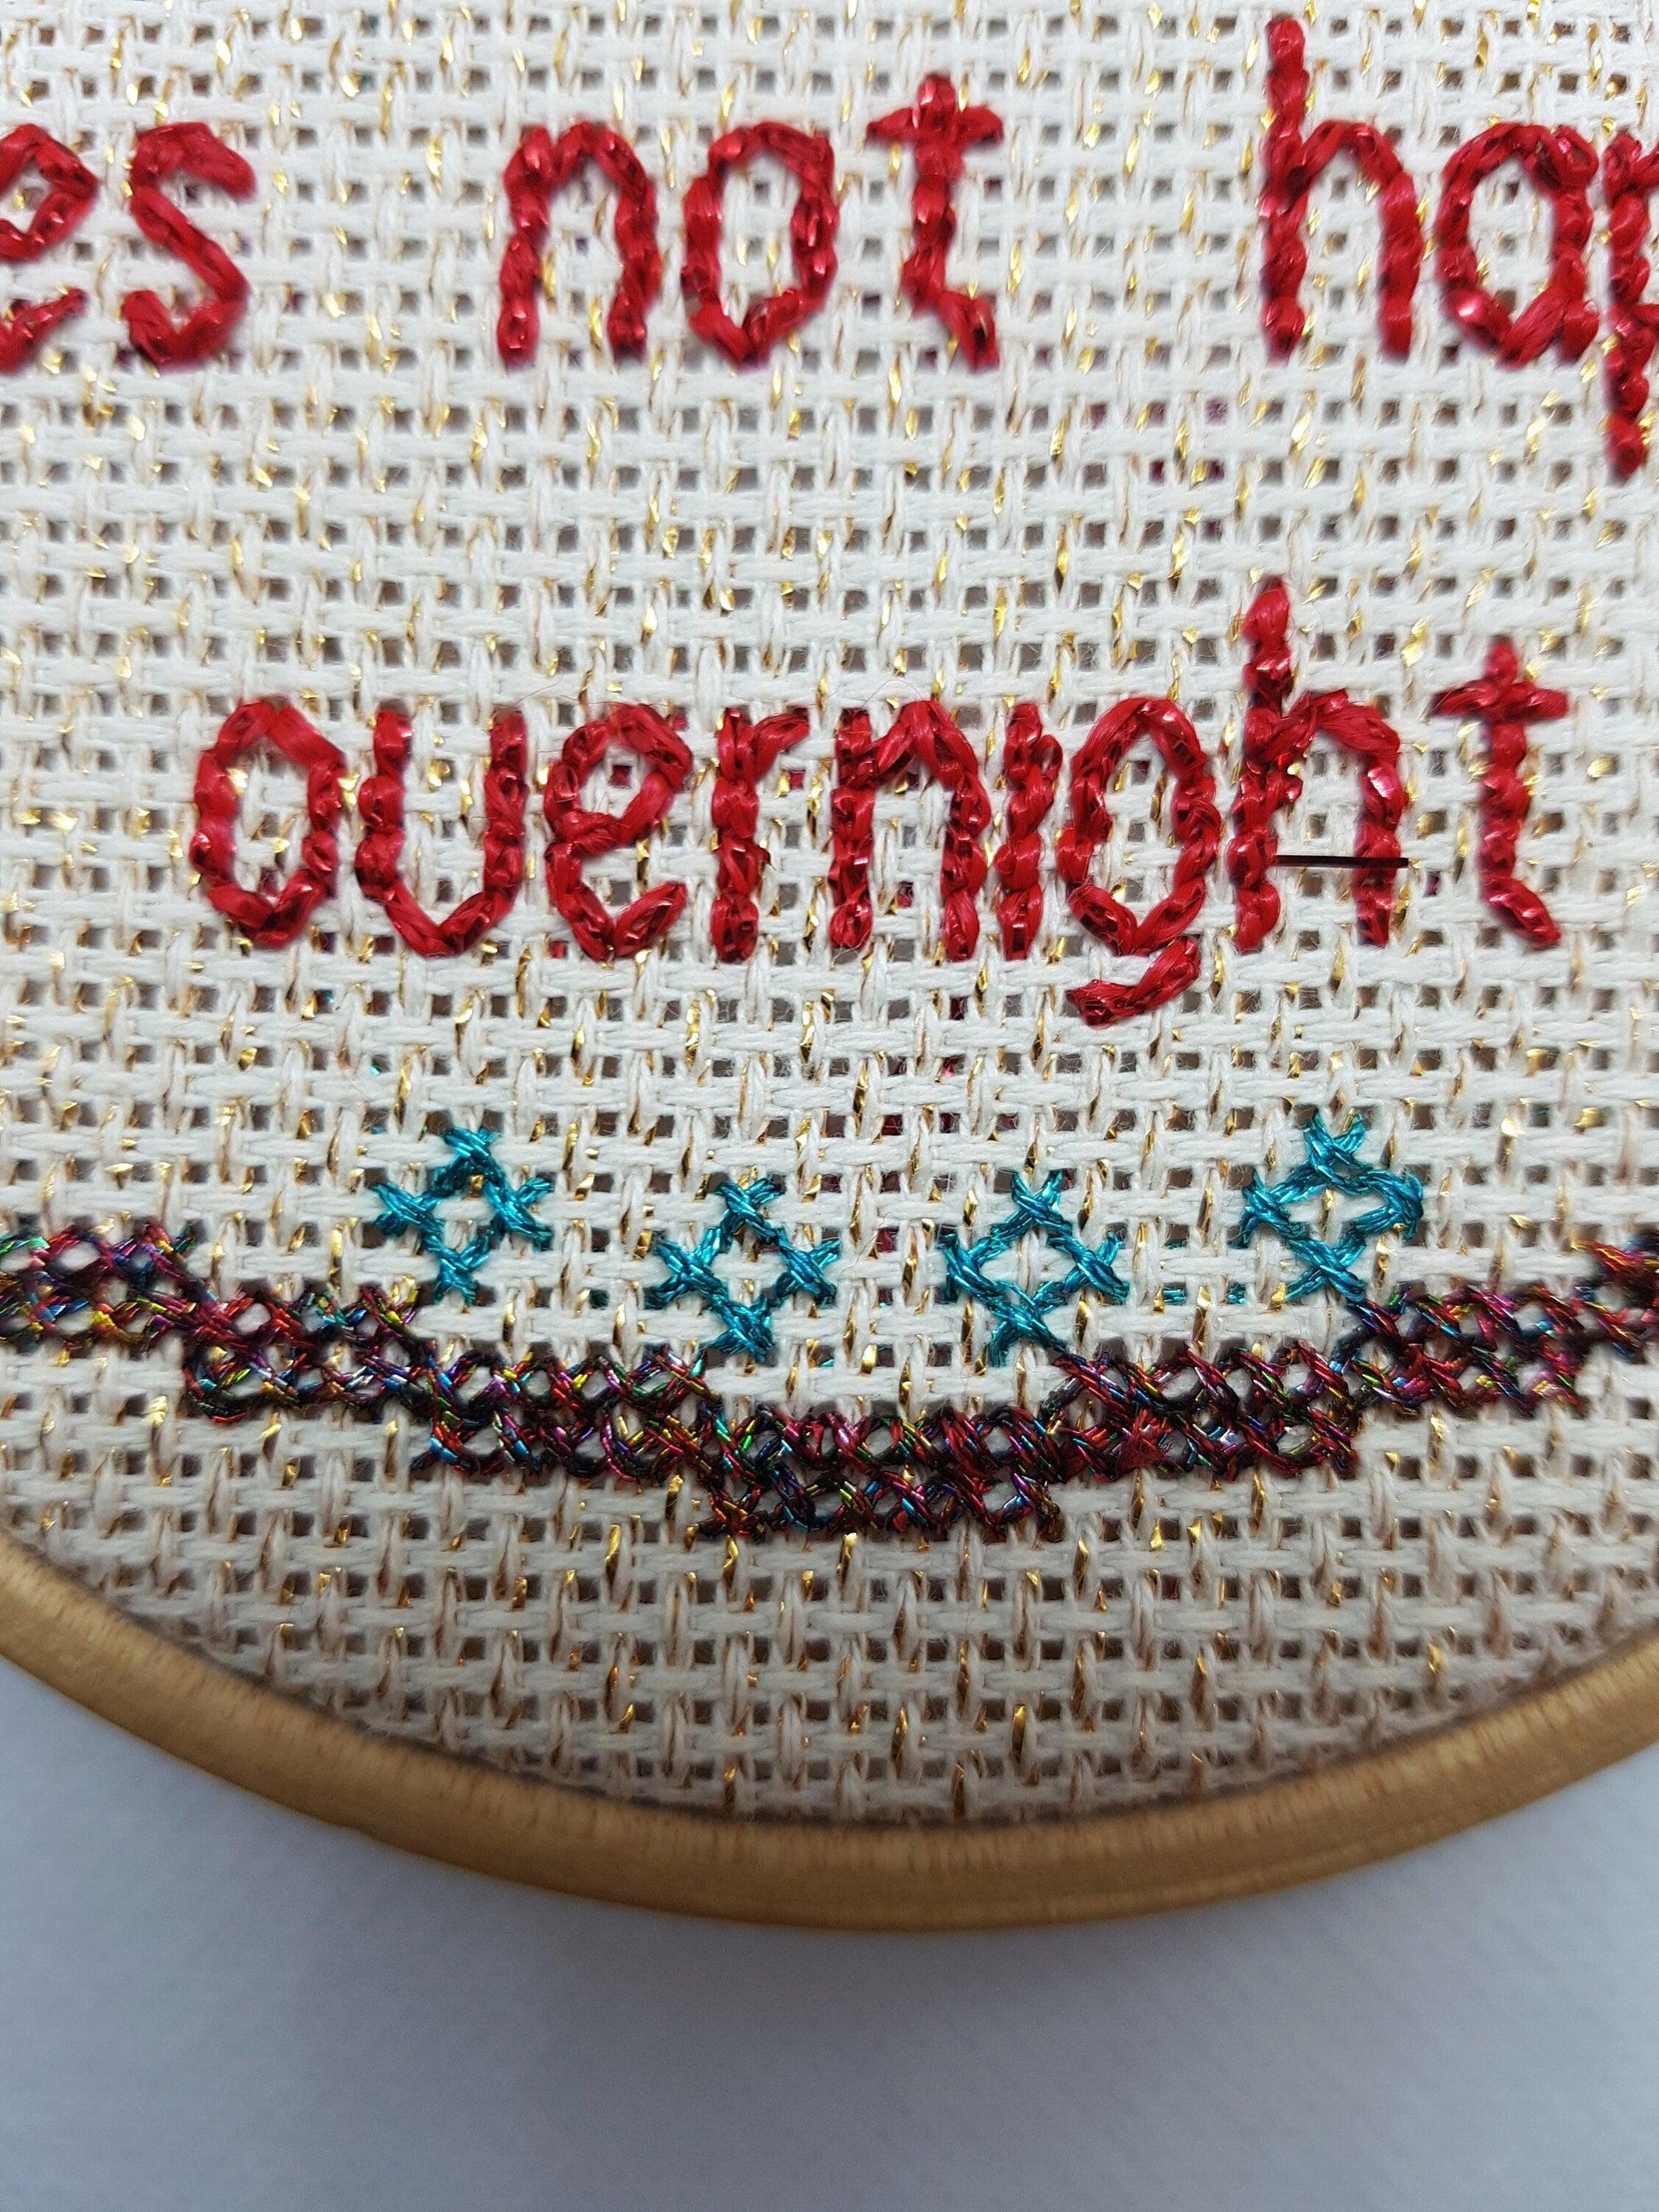 Change does not happen overnight, completed cross stitch quote - Thistleflat Crafts